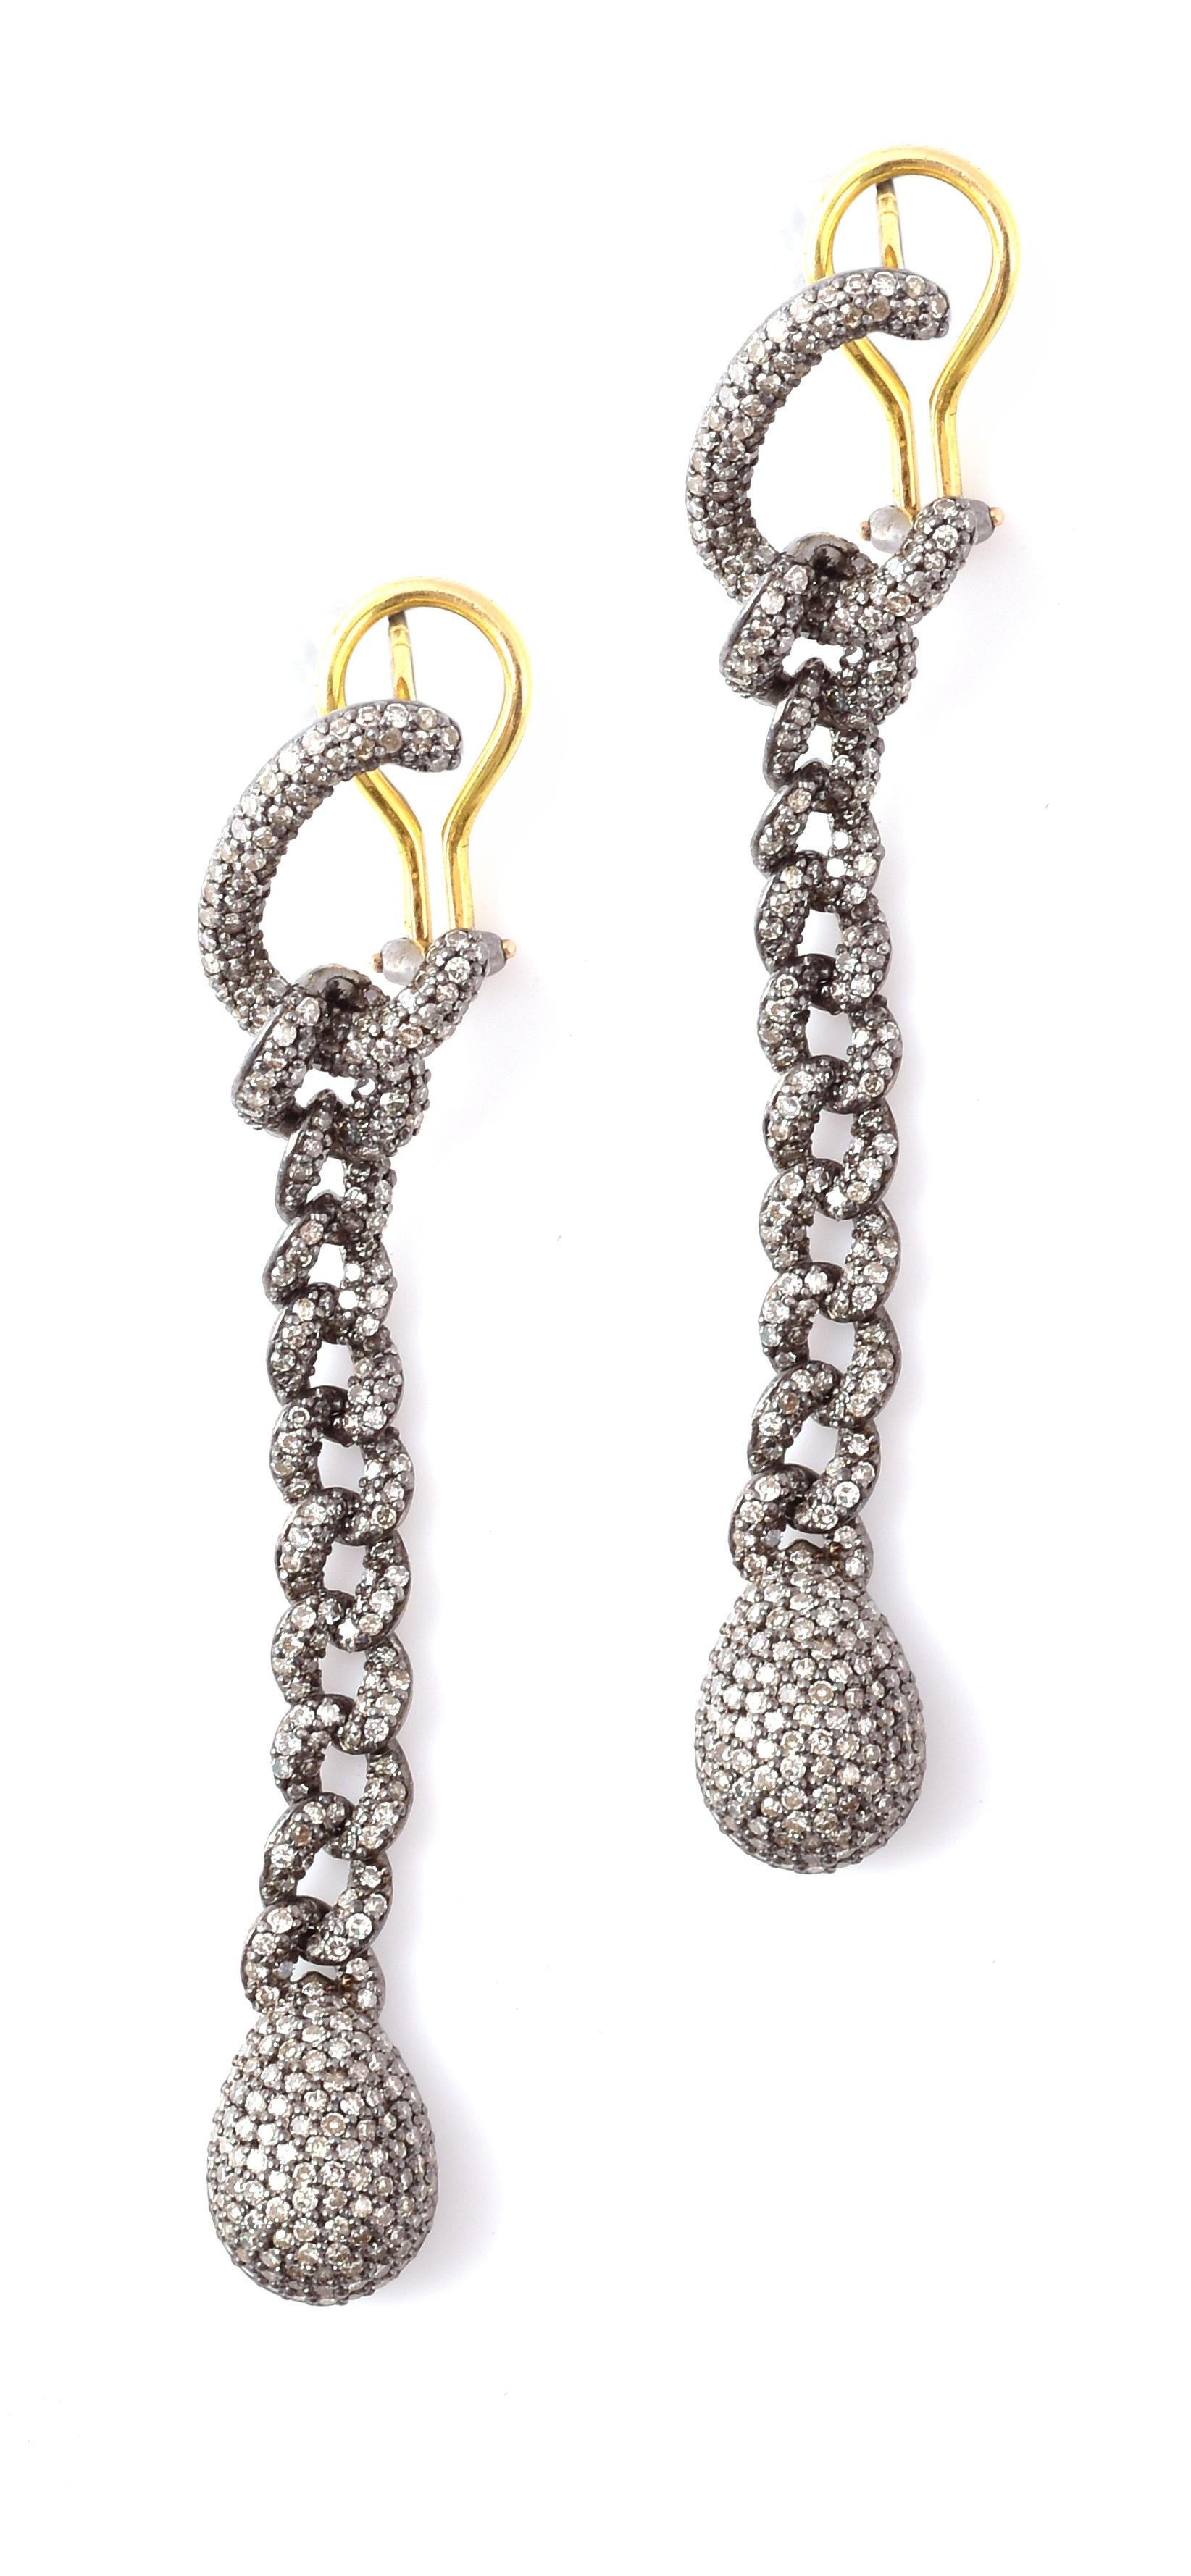 2.86 Carat Pave Diamond Link-Chain Drop Earrings

This Victorian art-deco style diamond pave set link earring is mesmerizing. The bottom drop is exceptionally formed with several graduating pave set diamonds rows beautifying the overall look, as it